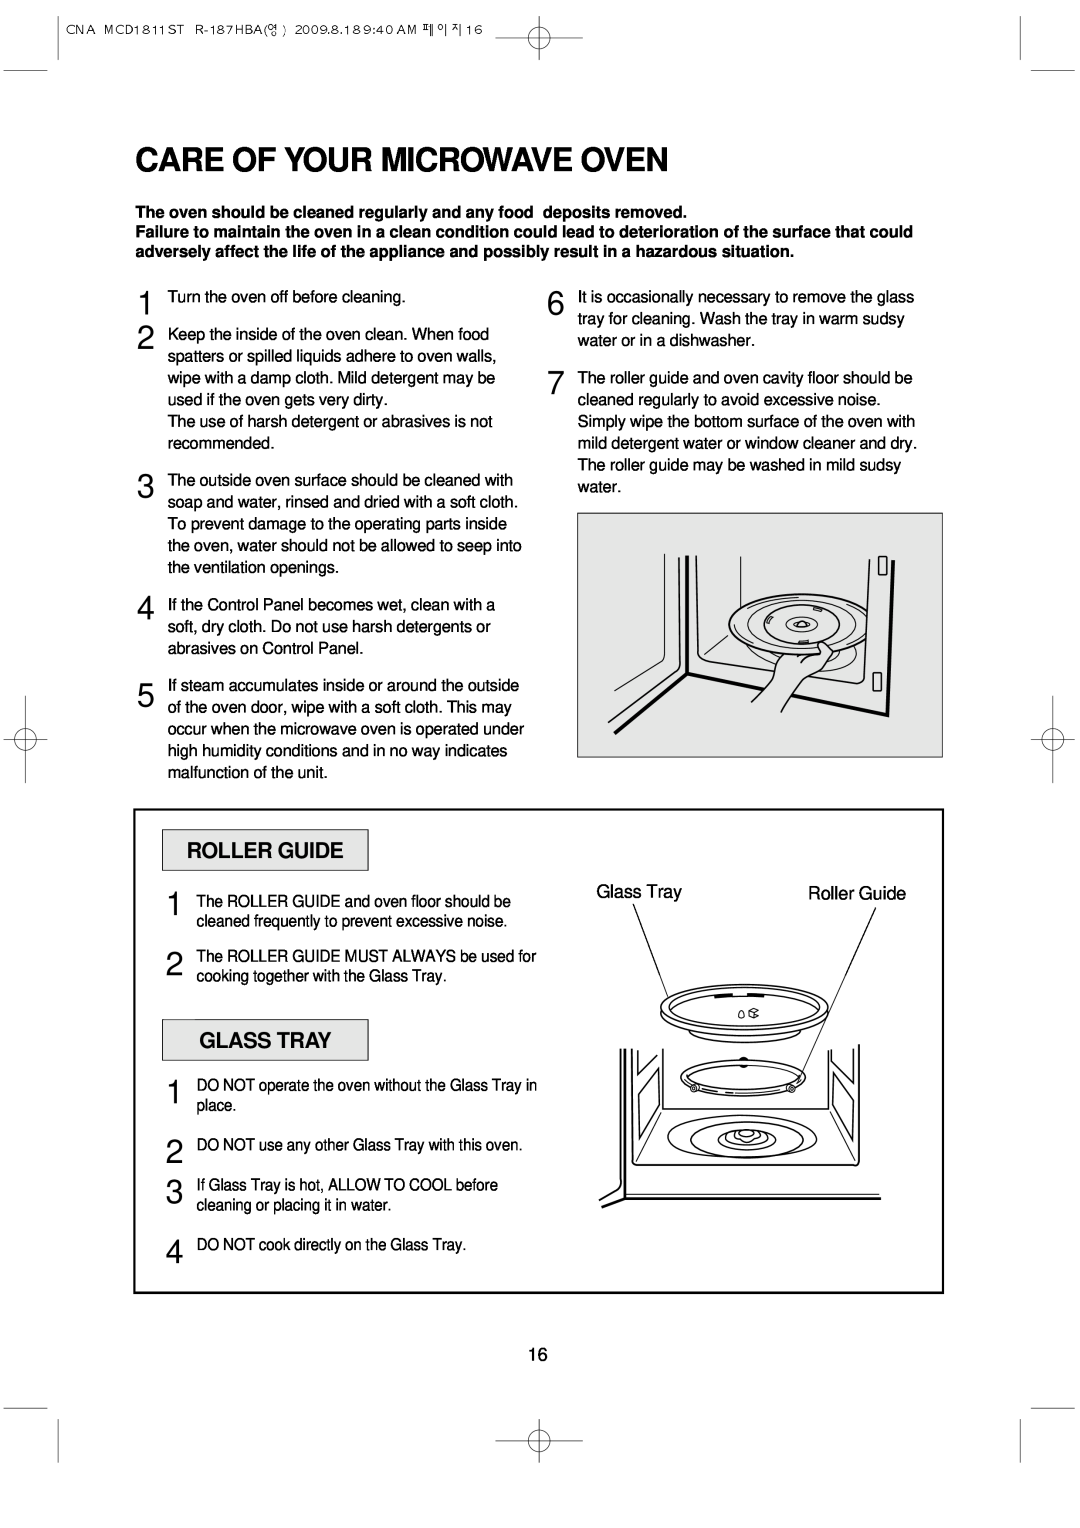 Magic Chef MCD1811ST instruction manual Care Of Your Microwave Oven, Roller Guide, Glass Tray 